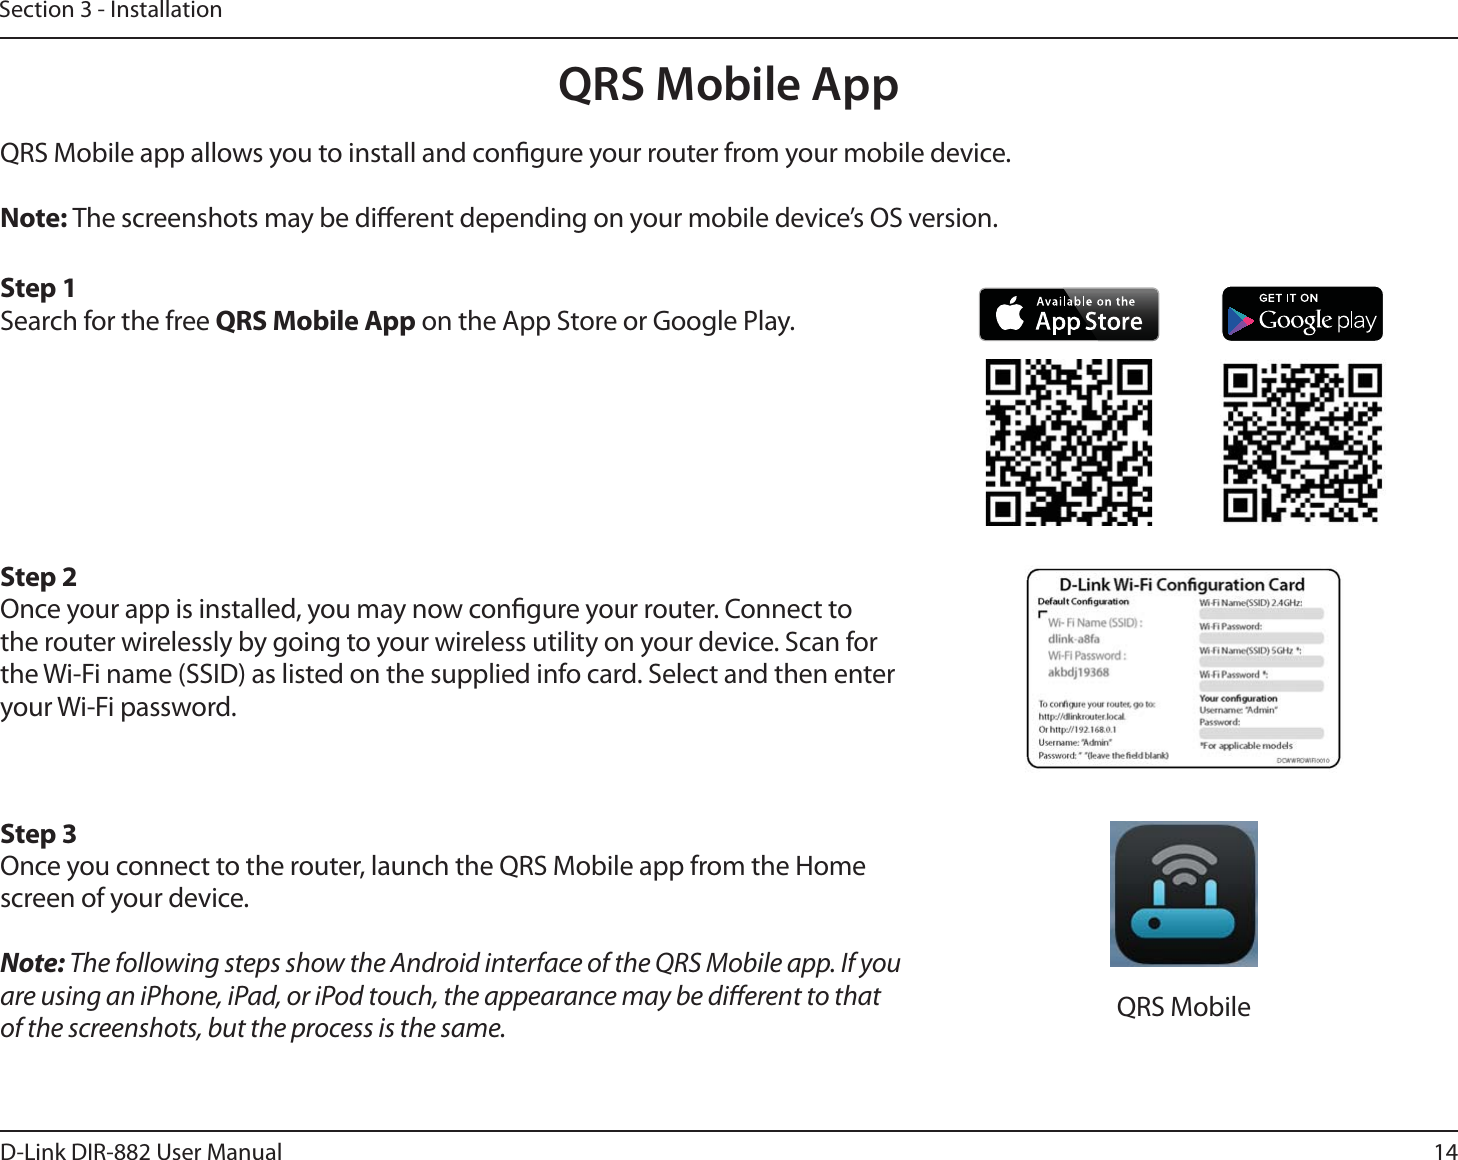 14D-Link DIR-882 User ManualSection 3 - InstallationQRS Mobile AppQRS Mobile app allows you to install and congure your router from your mobile device.Note: The screenshots may be dierent depending on your mobile device’s OS version. Step 1Search for the free 234.PCJMF&quot;QQ on the App Store or Google Play.Step 2Once your app is installed, you may now congure your router. Connect to the router wirelessly by going to your wireless utility on your device. Scan for the Wi-Fi name (SSID) as listed on the supplied info card. Select and then enter your Wi-Fi password.Step 3Once you connect to the router, launch the QRS Mobile app from the Home screen of your device.Note: The following steps show the Android interface of the QRS Mobile app. If you are using an iPhone, iPad, or iPod touch, the appearance may be dierent to that of the screenshots, but the process is the same. QRS Mobile